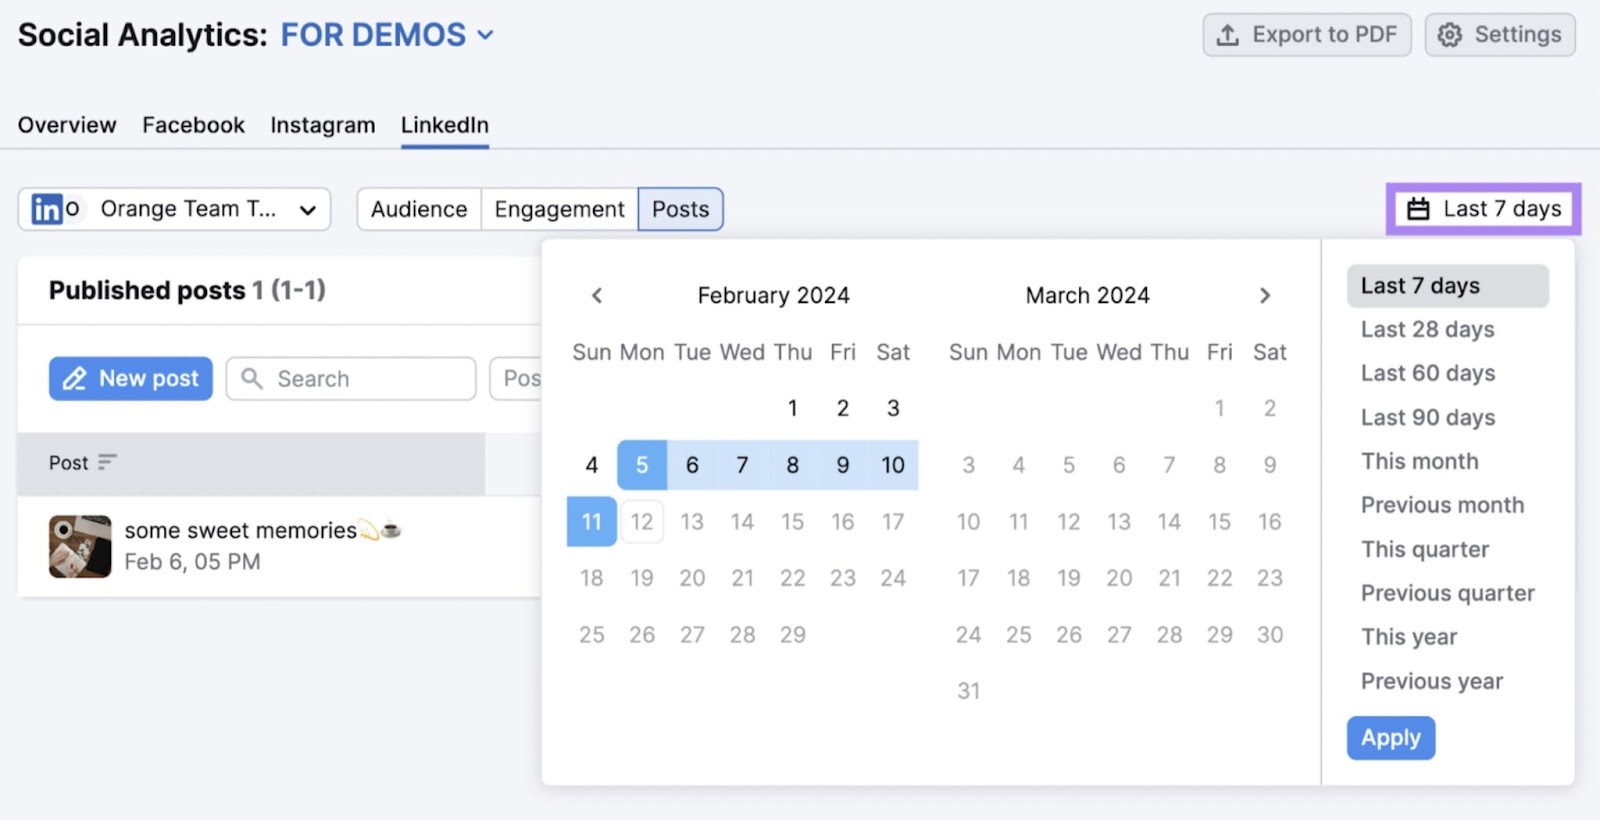 Semrush Social Analytics calendar interface with the past  7 days highlighted and displayed